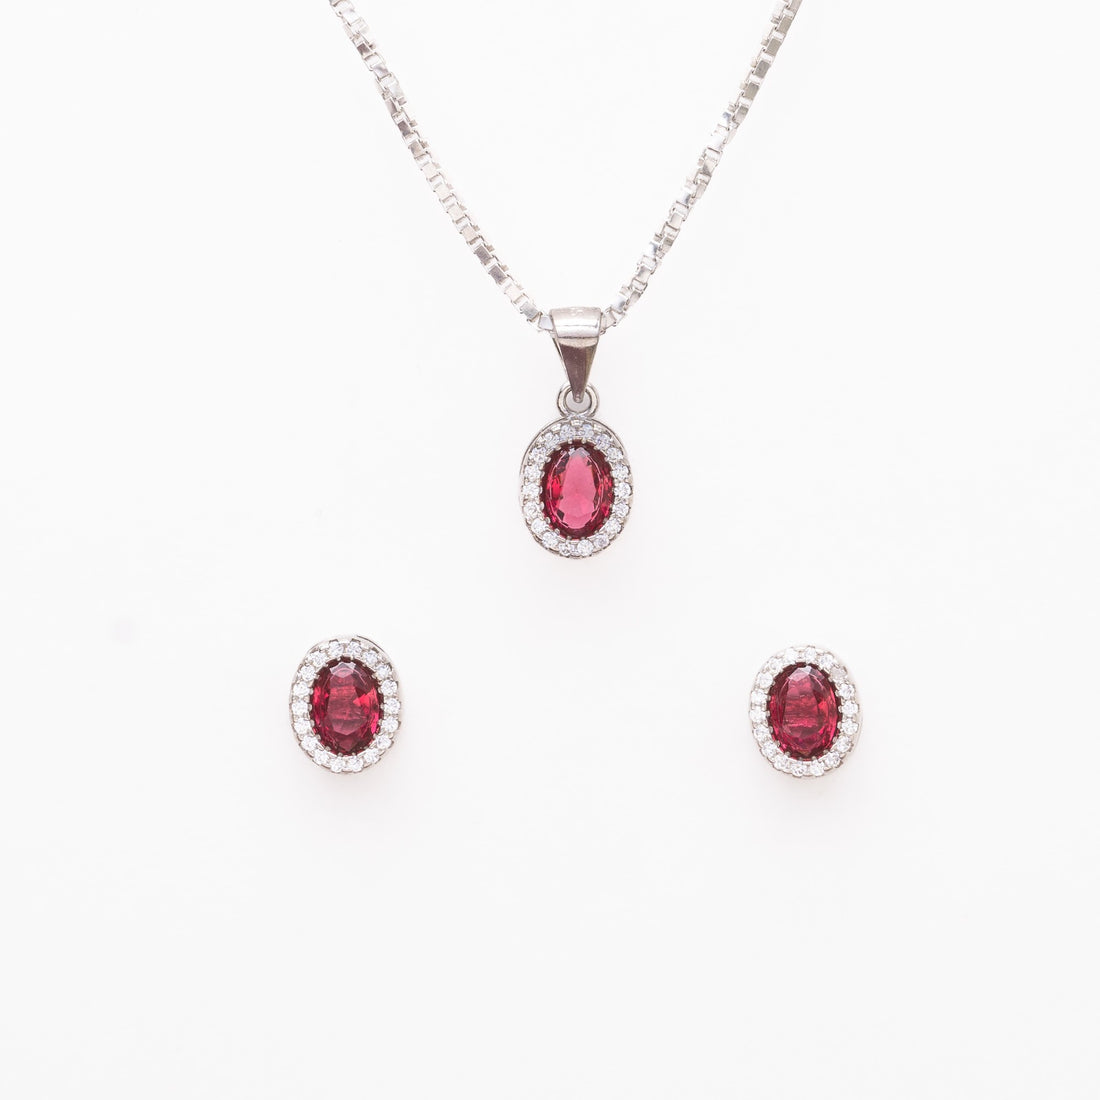 Silver Set Chain Pendant and Earrings with Red Stones for Women